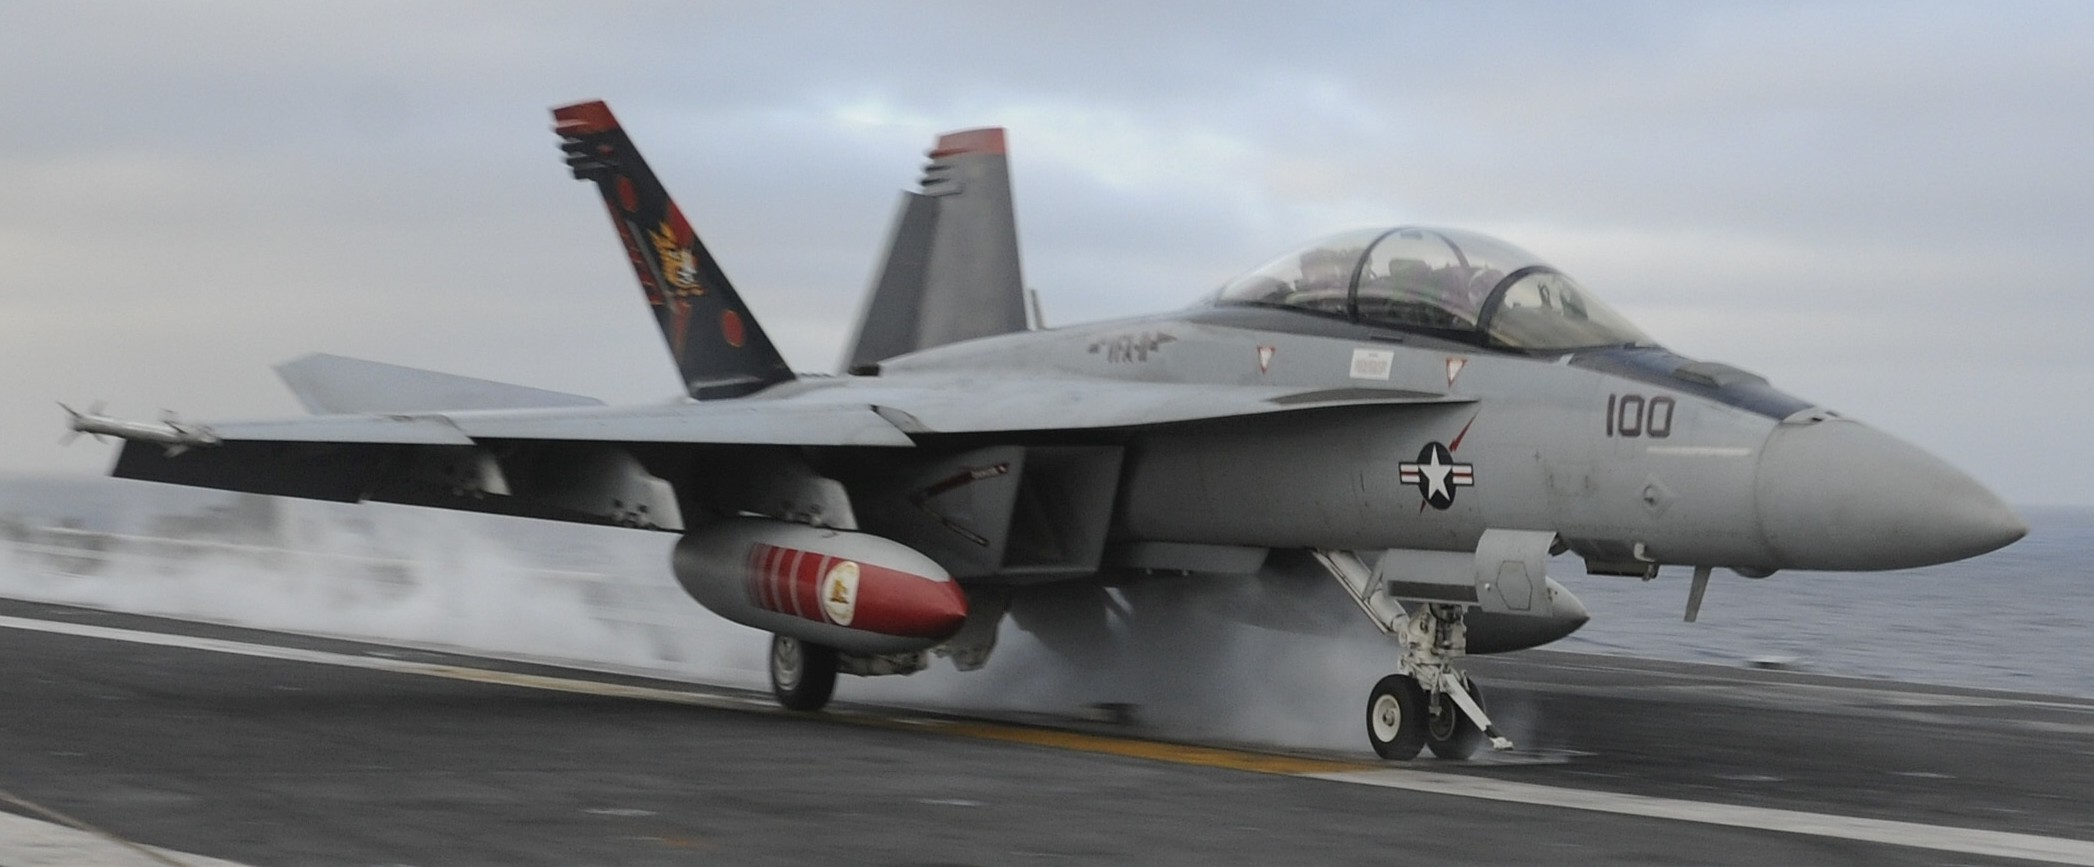 vfa-11 red rippers strike fighter squadron us navy f/a-18f super hornet carrier air wing cvw-1 uss theodore roosevelt cvn-71 24